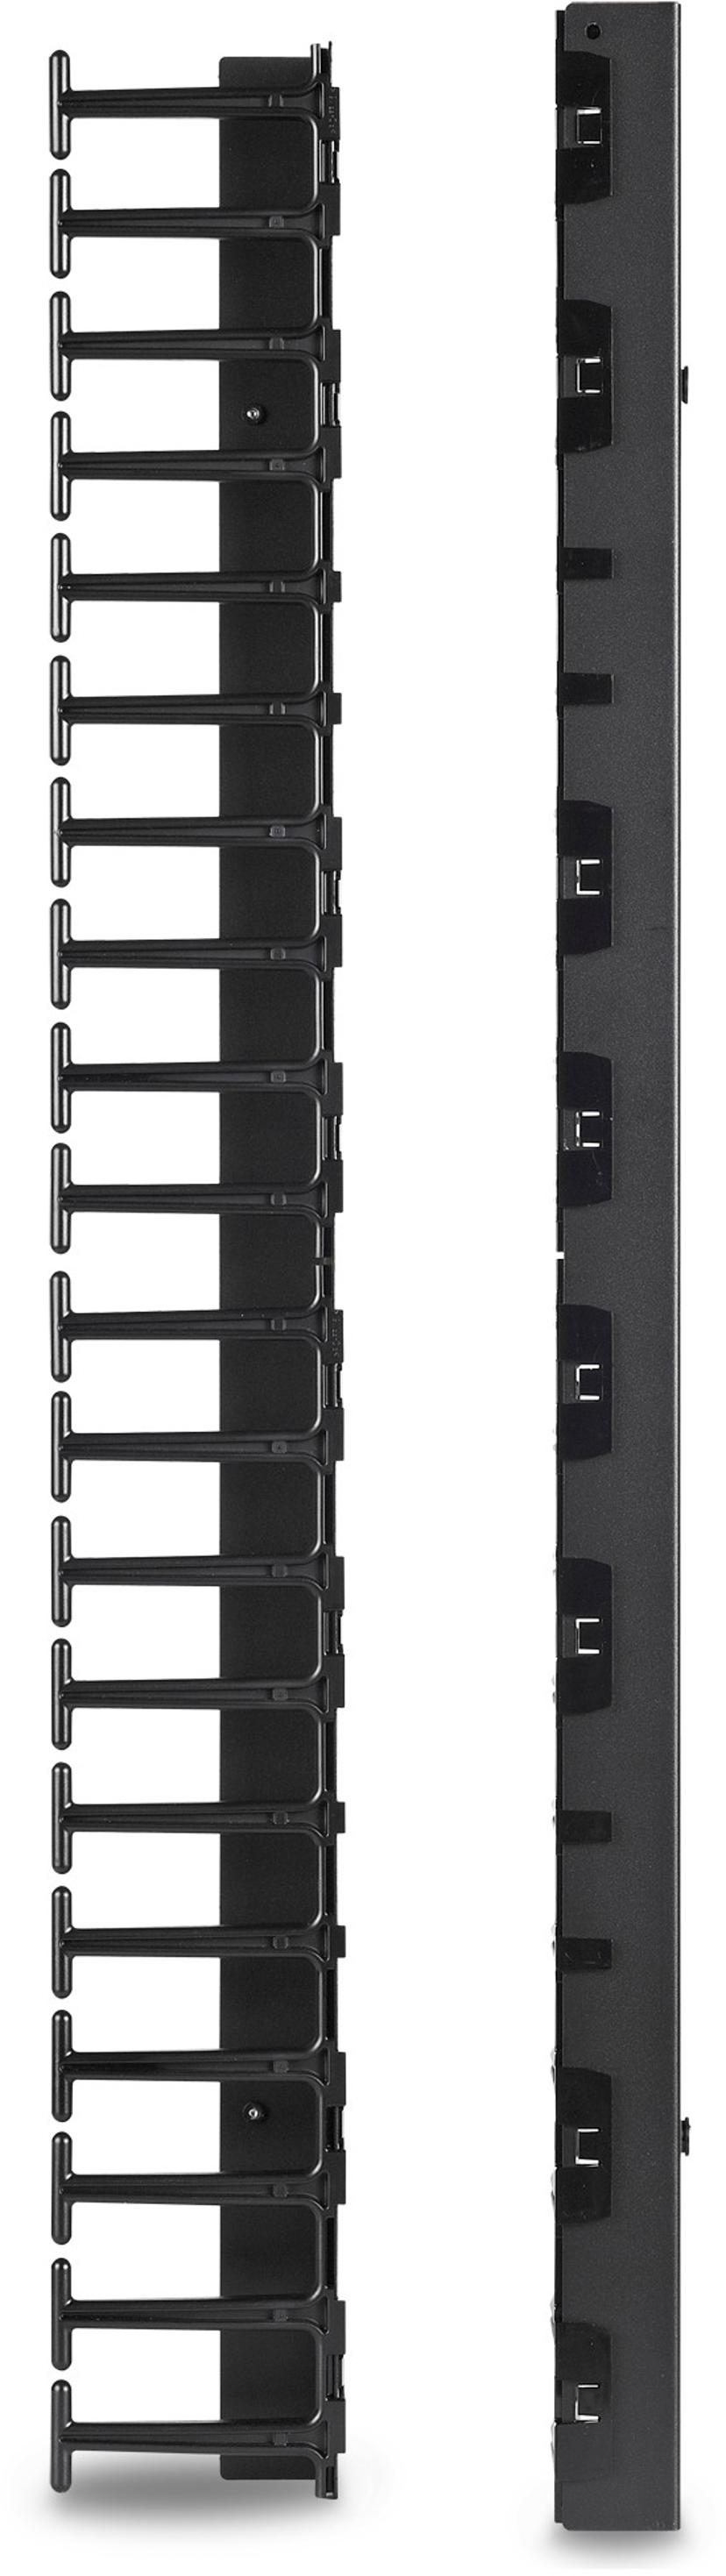 APC Rack panel for cable management